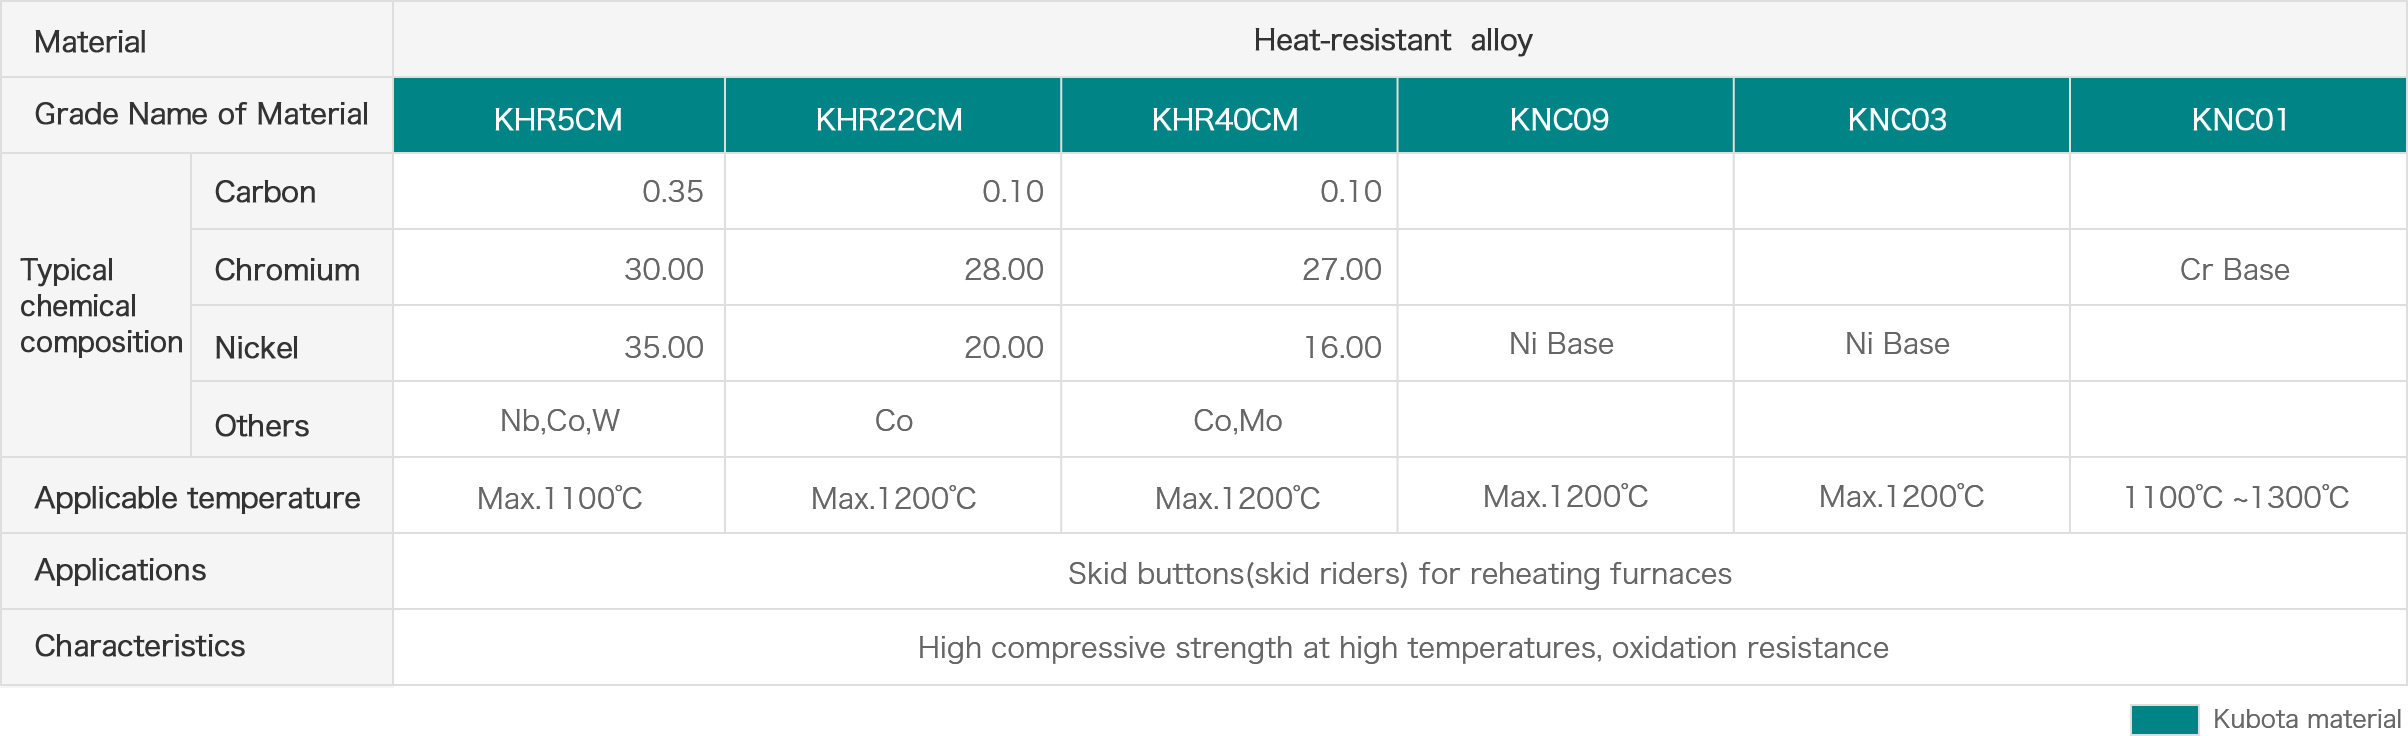 Materials with high compressive strength at high temperatures